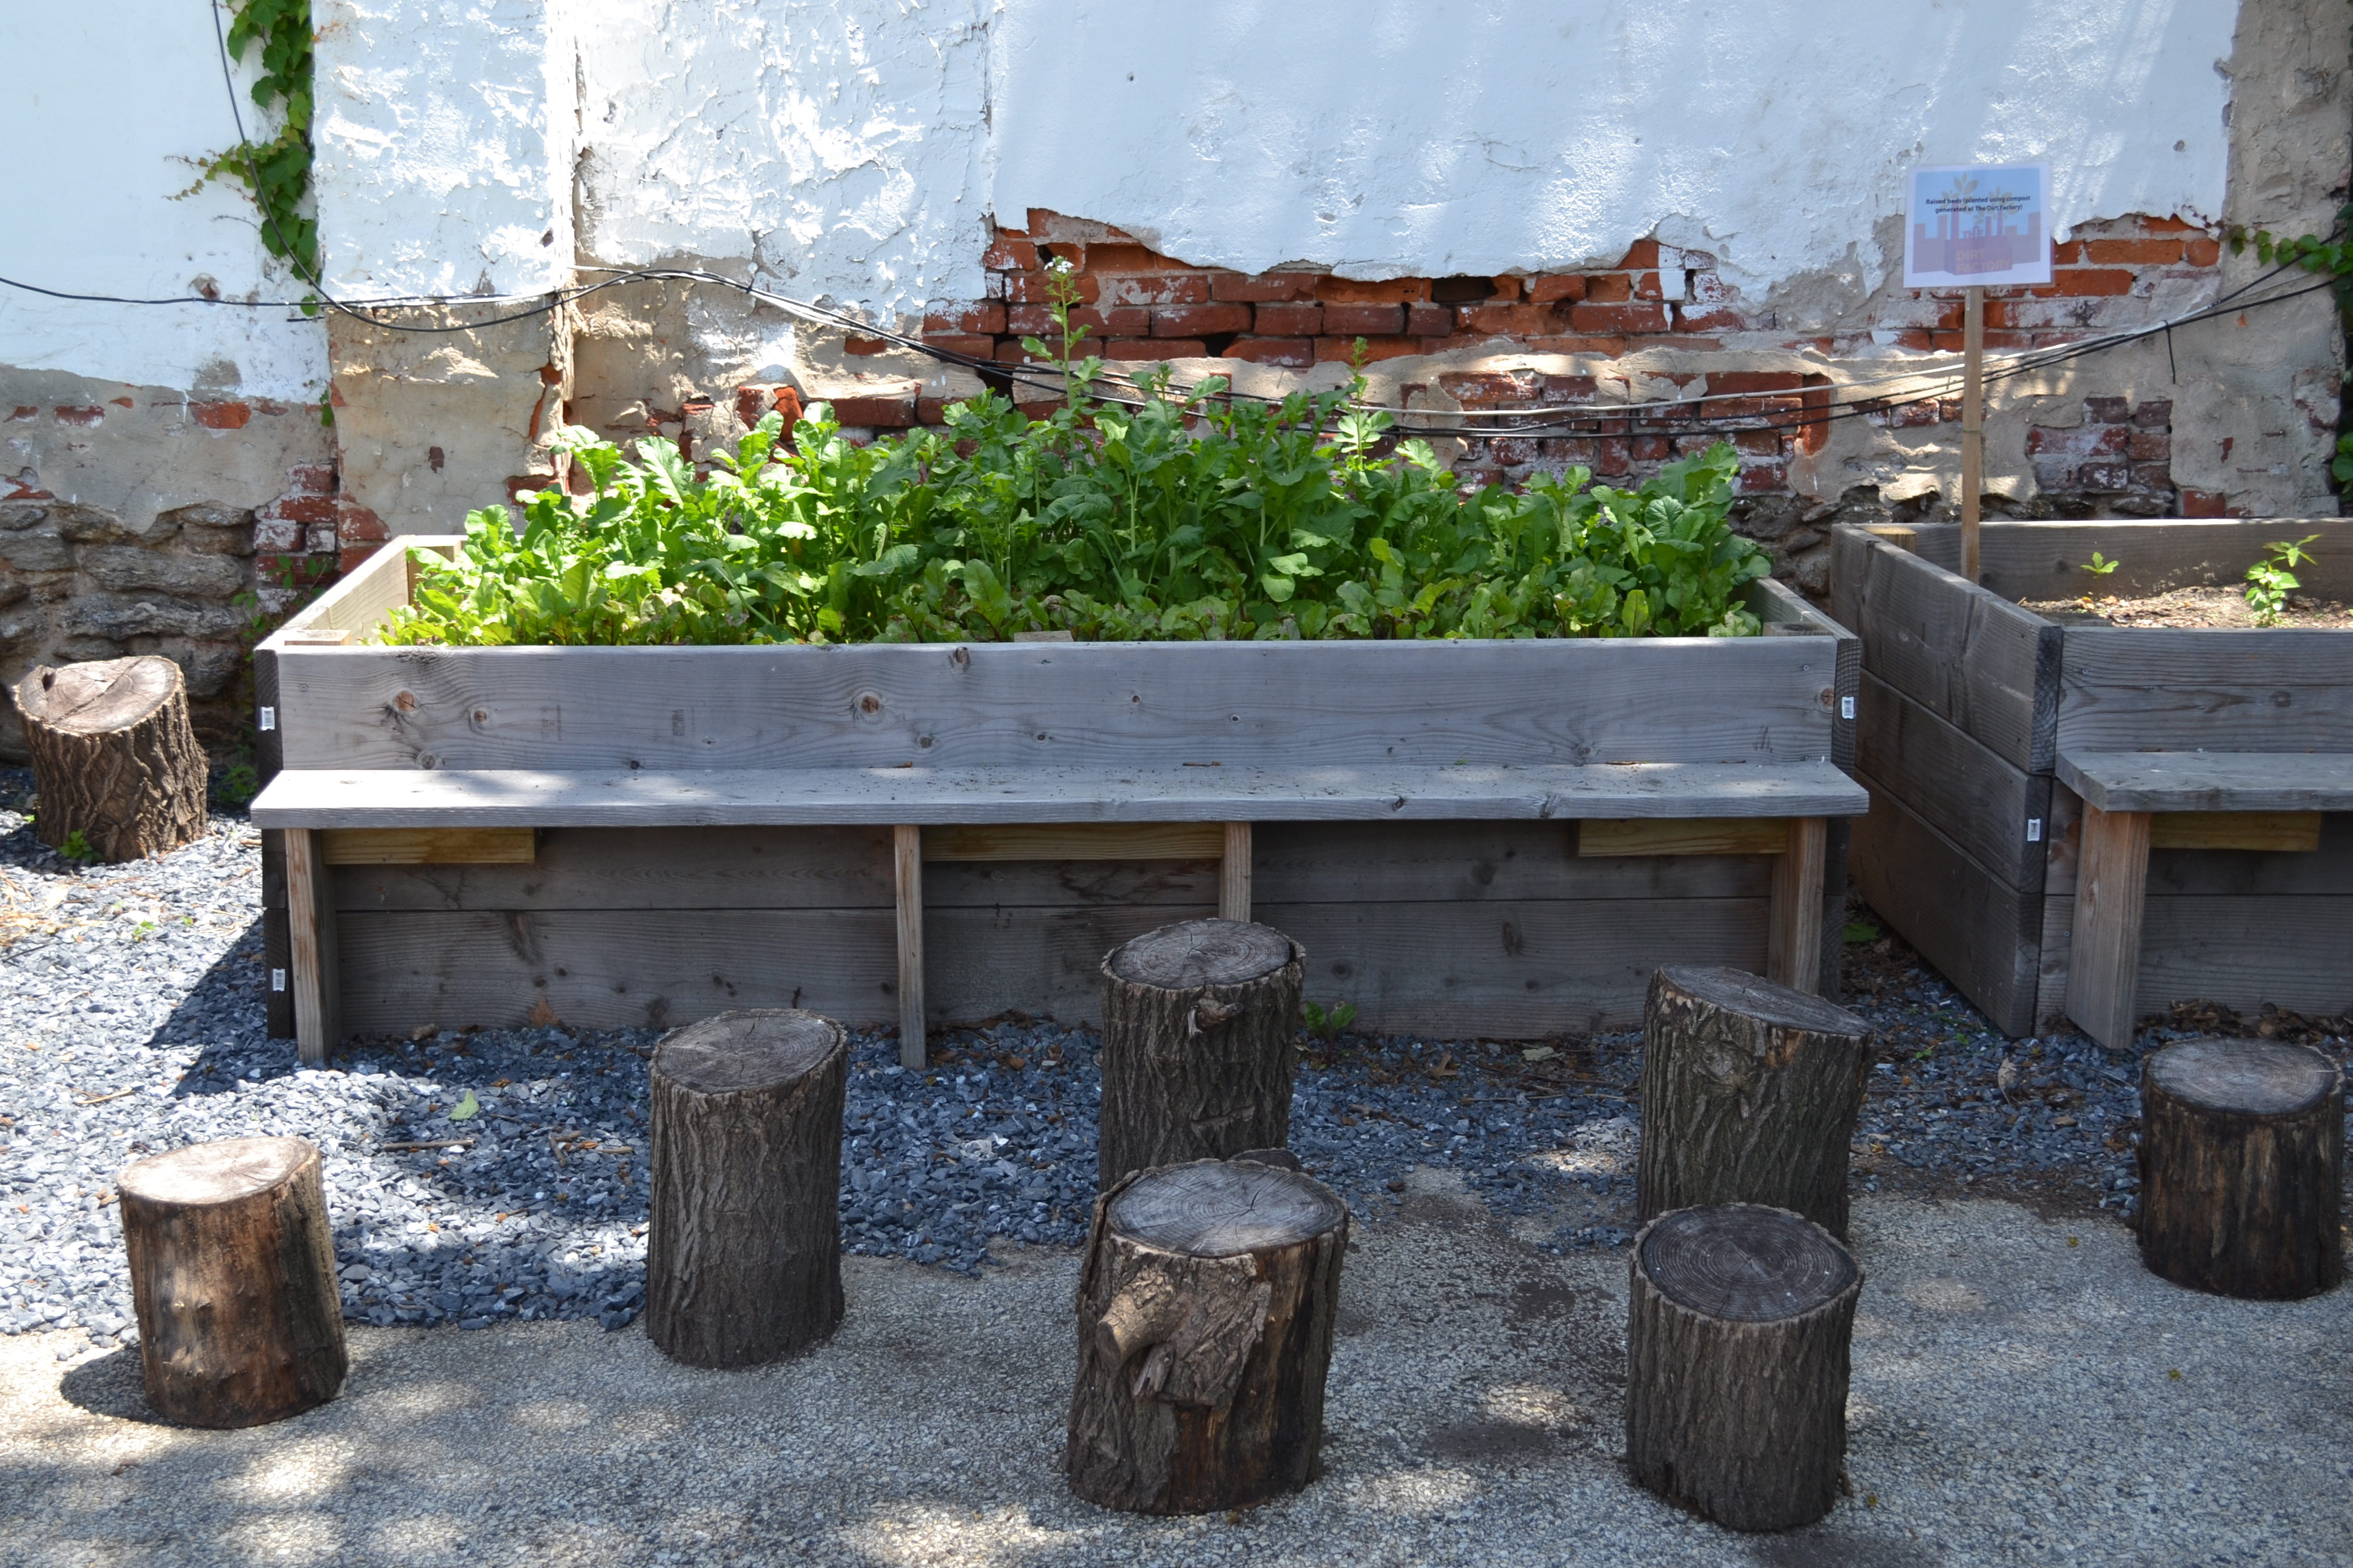 With recycled stump seating and vegetable beds, The Dirt Factory also serves as a community space 